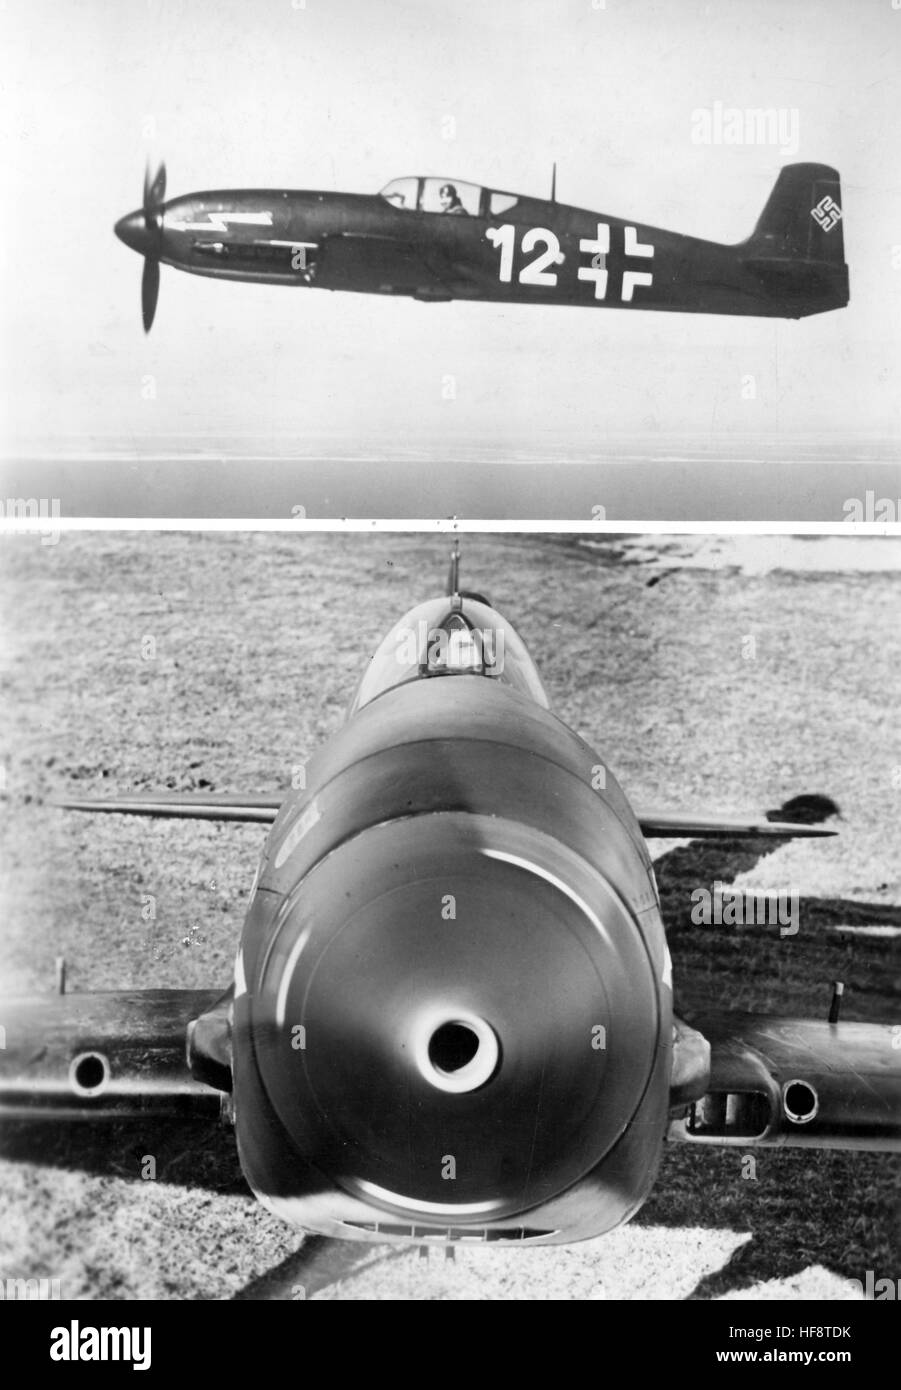 The Nazi propaganda image shows in a two-photo montage, depicting German Wehrmacht Heinkel 113 (He 100) fighter planes. Published in July 1942. A Nazi reporter has written on the reverse, 'Put to the test in countless missions. The single-seat He 113 fighter plane from Heinkel Manufacturers, which has contributed to victories in countless air battles. It is a cantilevered, low-roof, all-metal construction. The landing gear, which is equipped with heavy weaponry, can be retracted into the wings.' Fotoarchiv für Zeitgeschichte - NO WIRELESS SERVICE - | usage worldwide Stock Photo